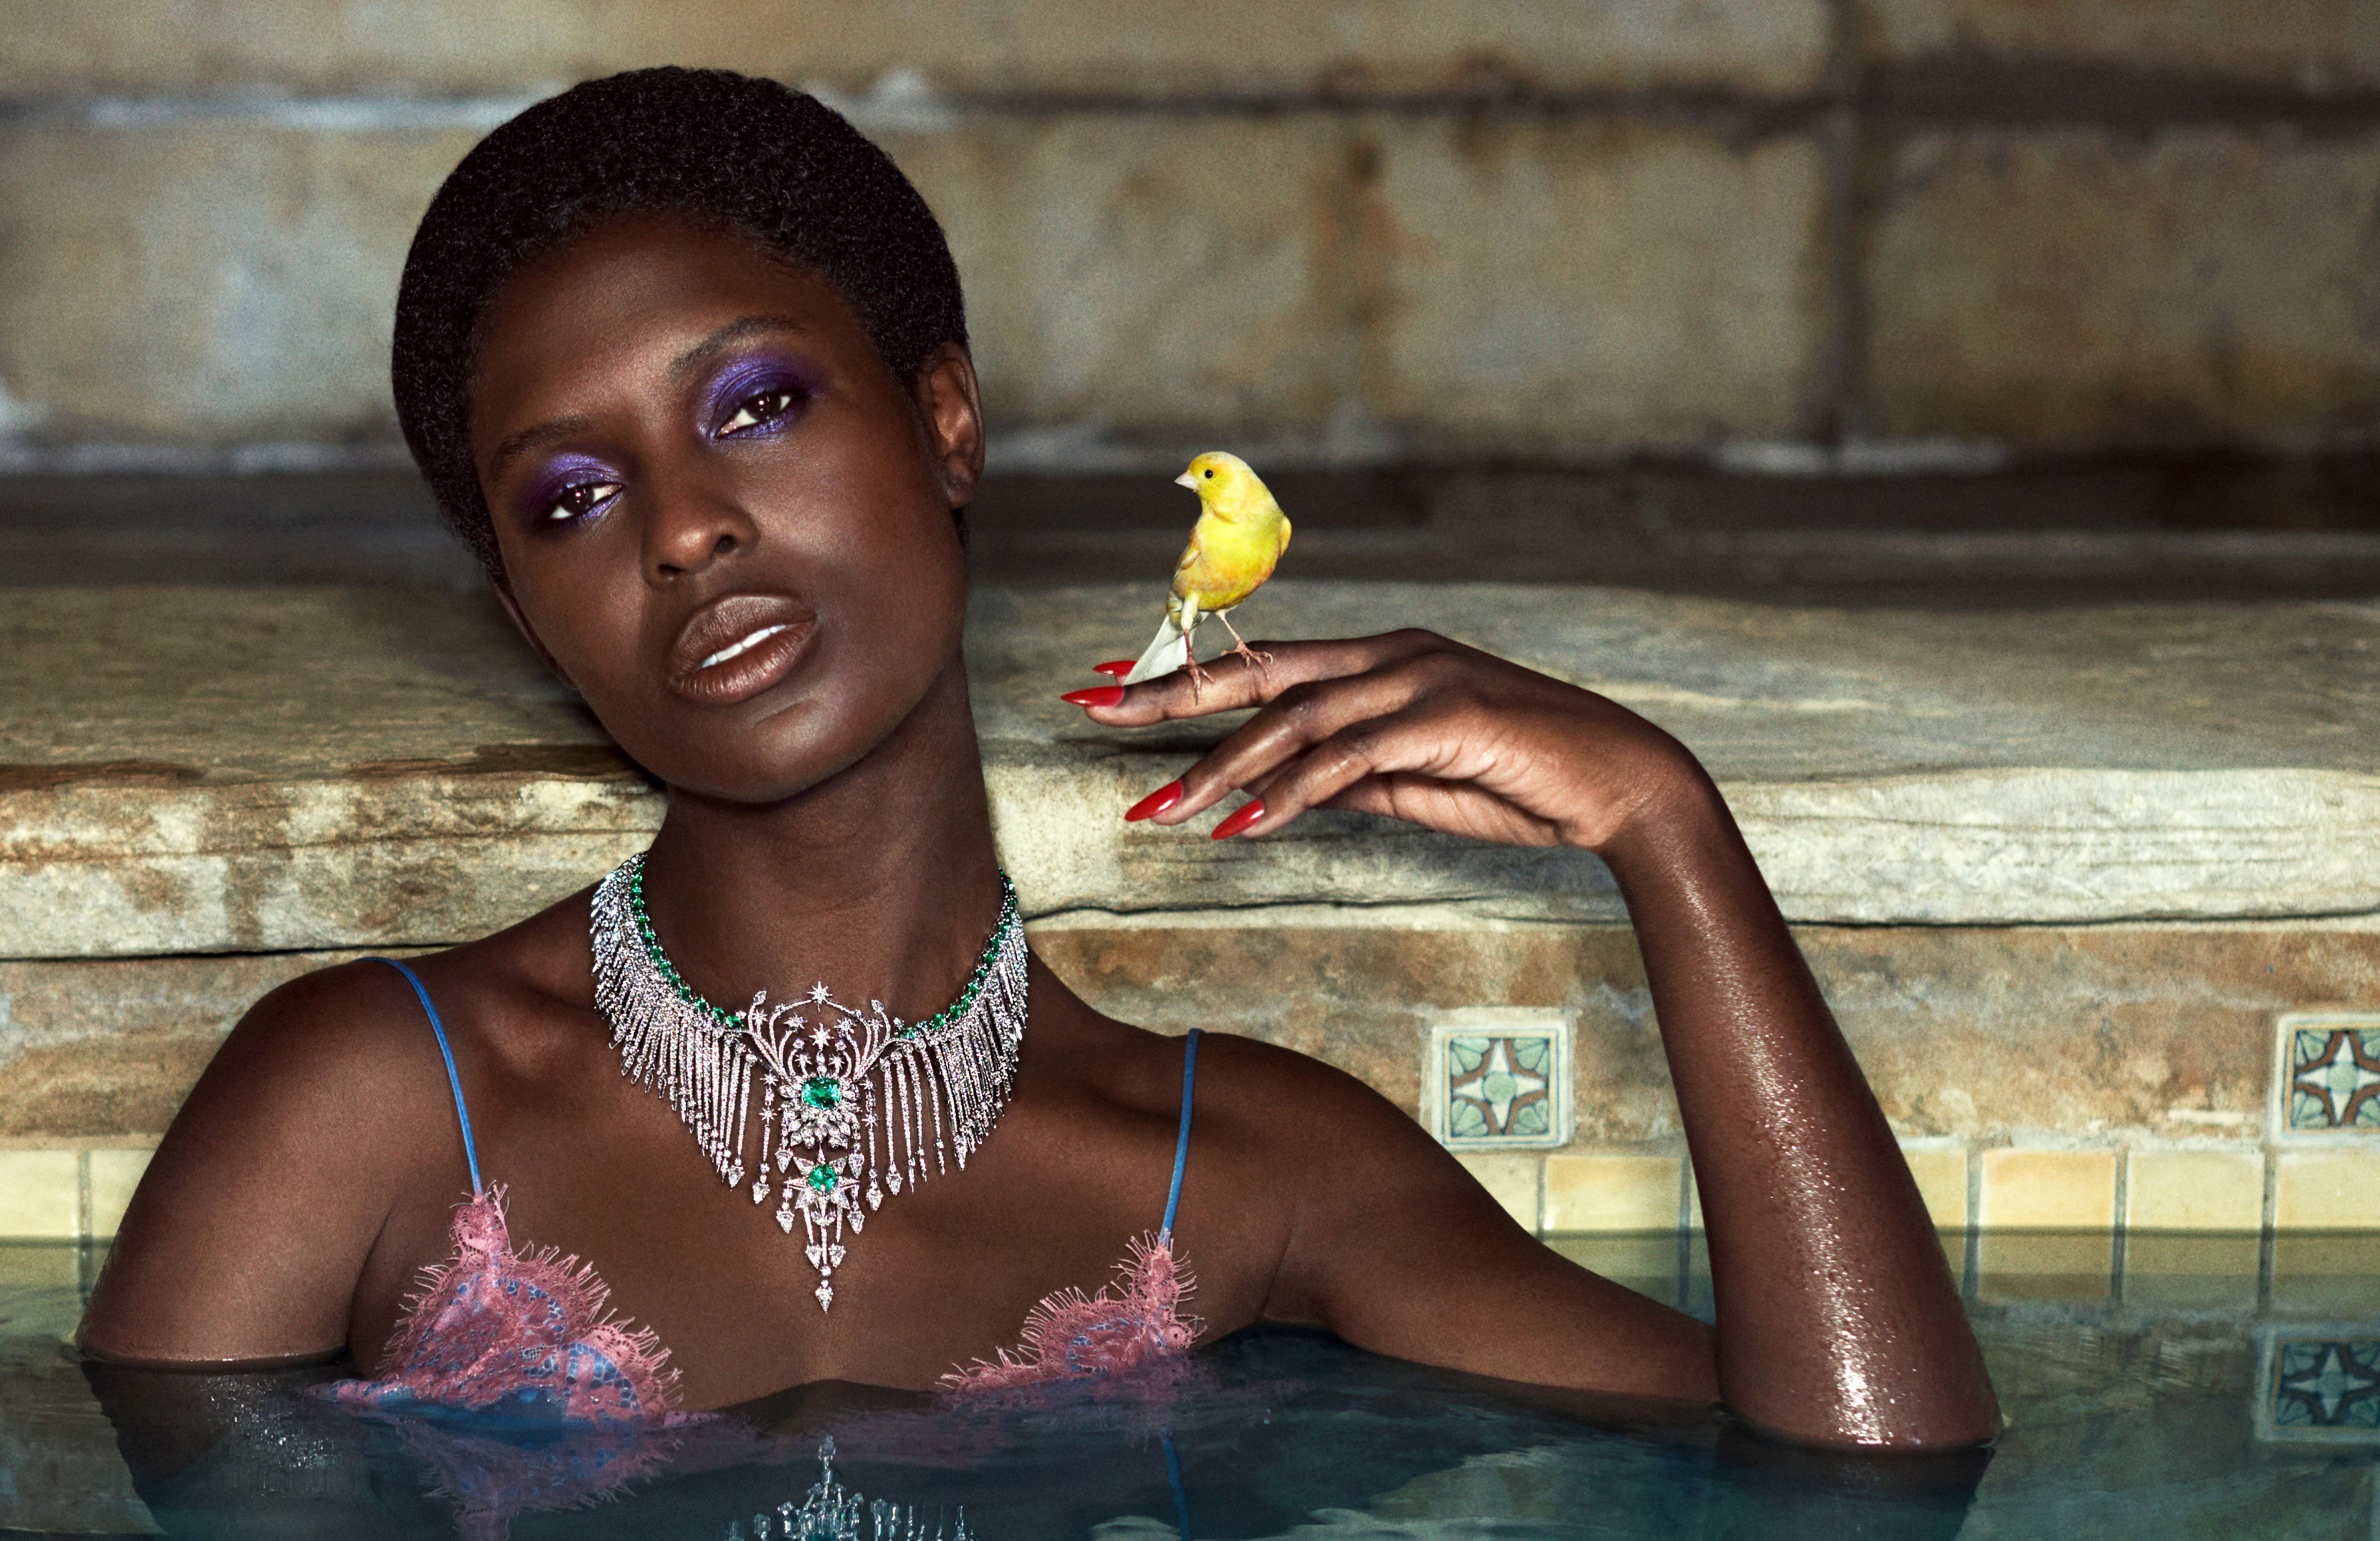 Gucci Grows a Garden for Its First High Jewelry Collection